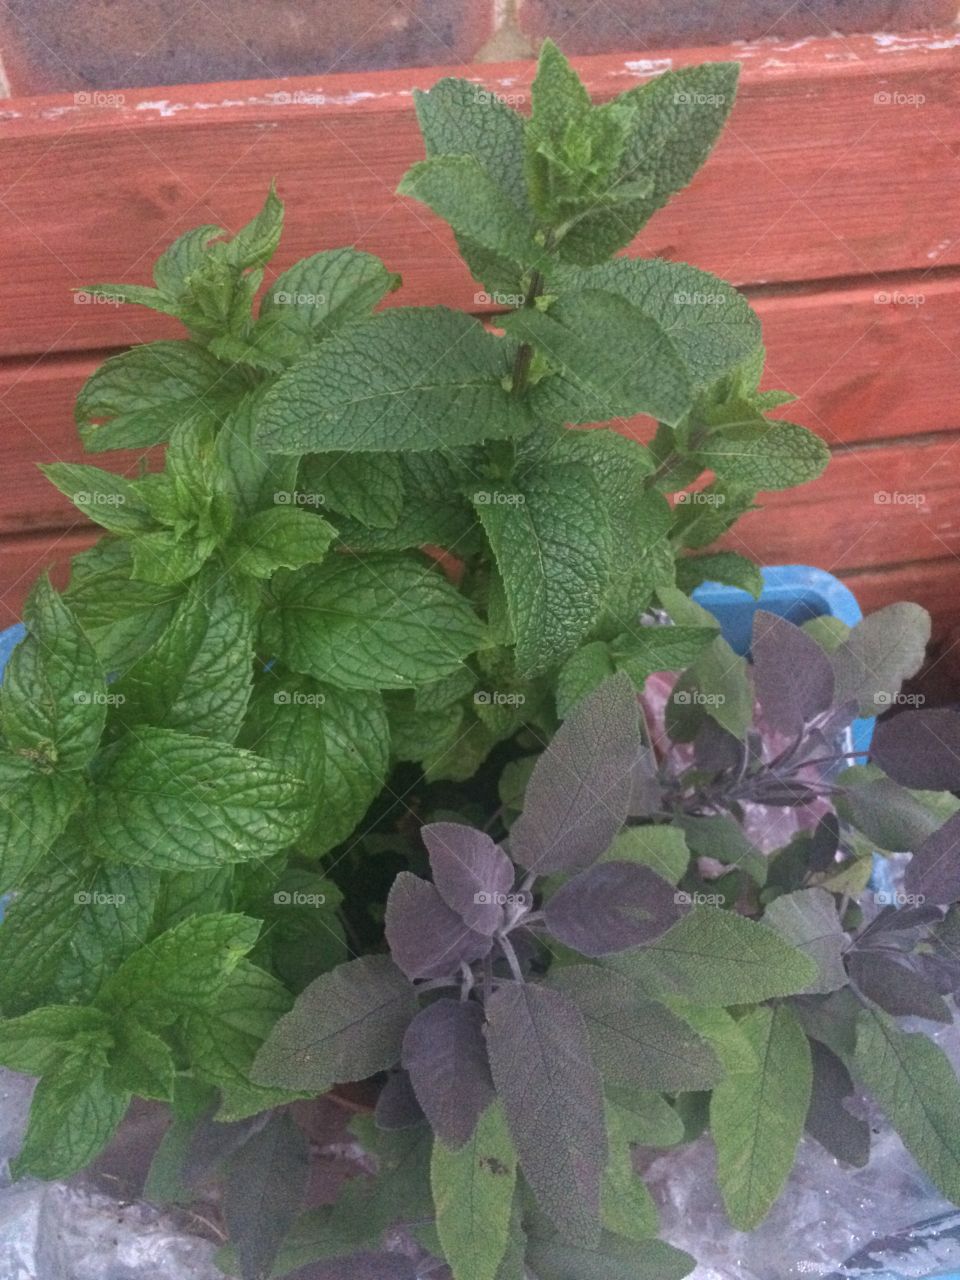 Mint and sage in a pot on a red garden bench